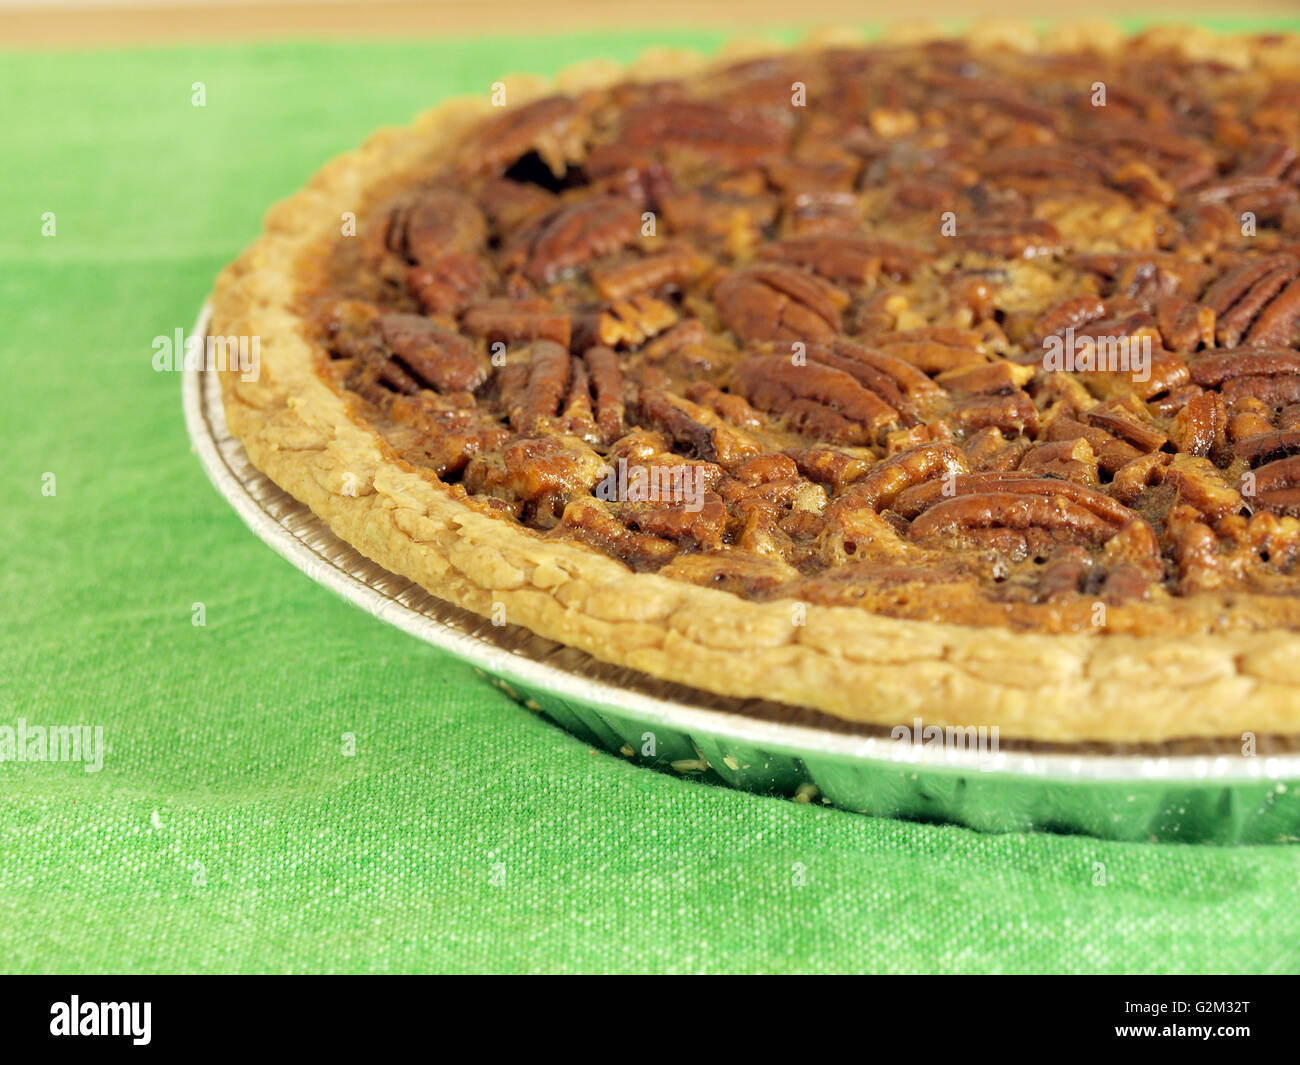 close up image of homemade pecan pie on a green table cloth Stock Photo